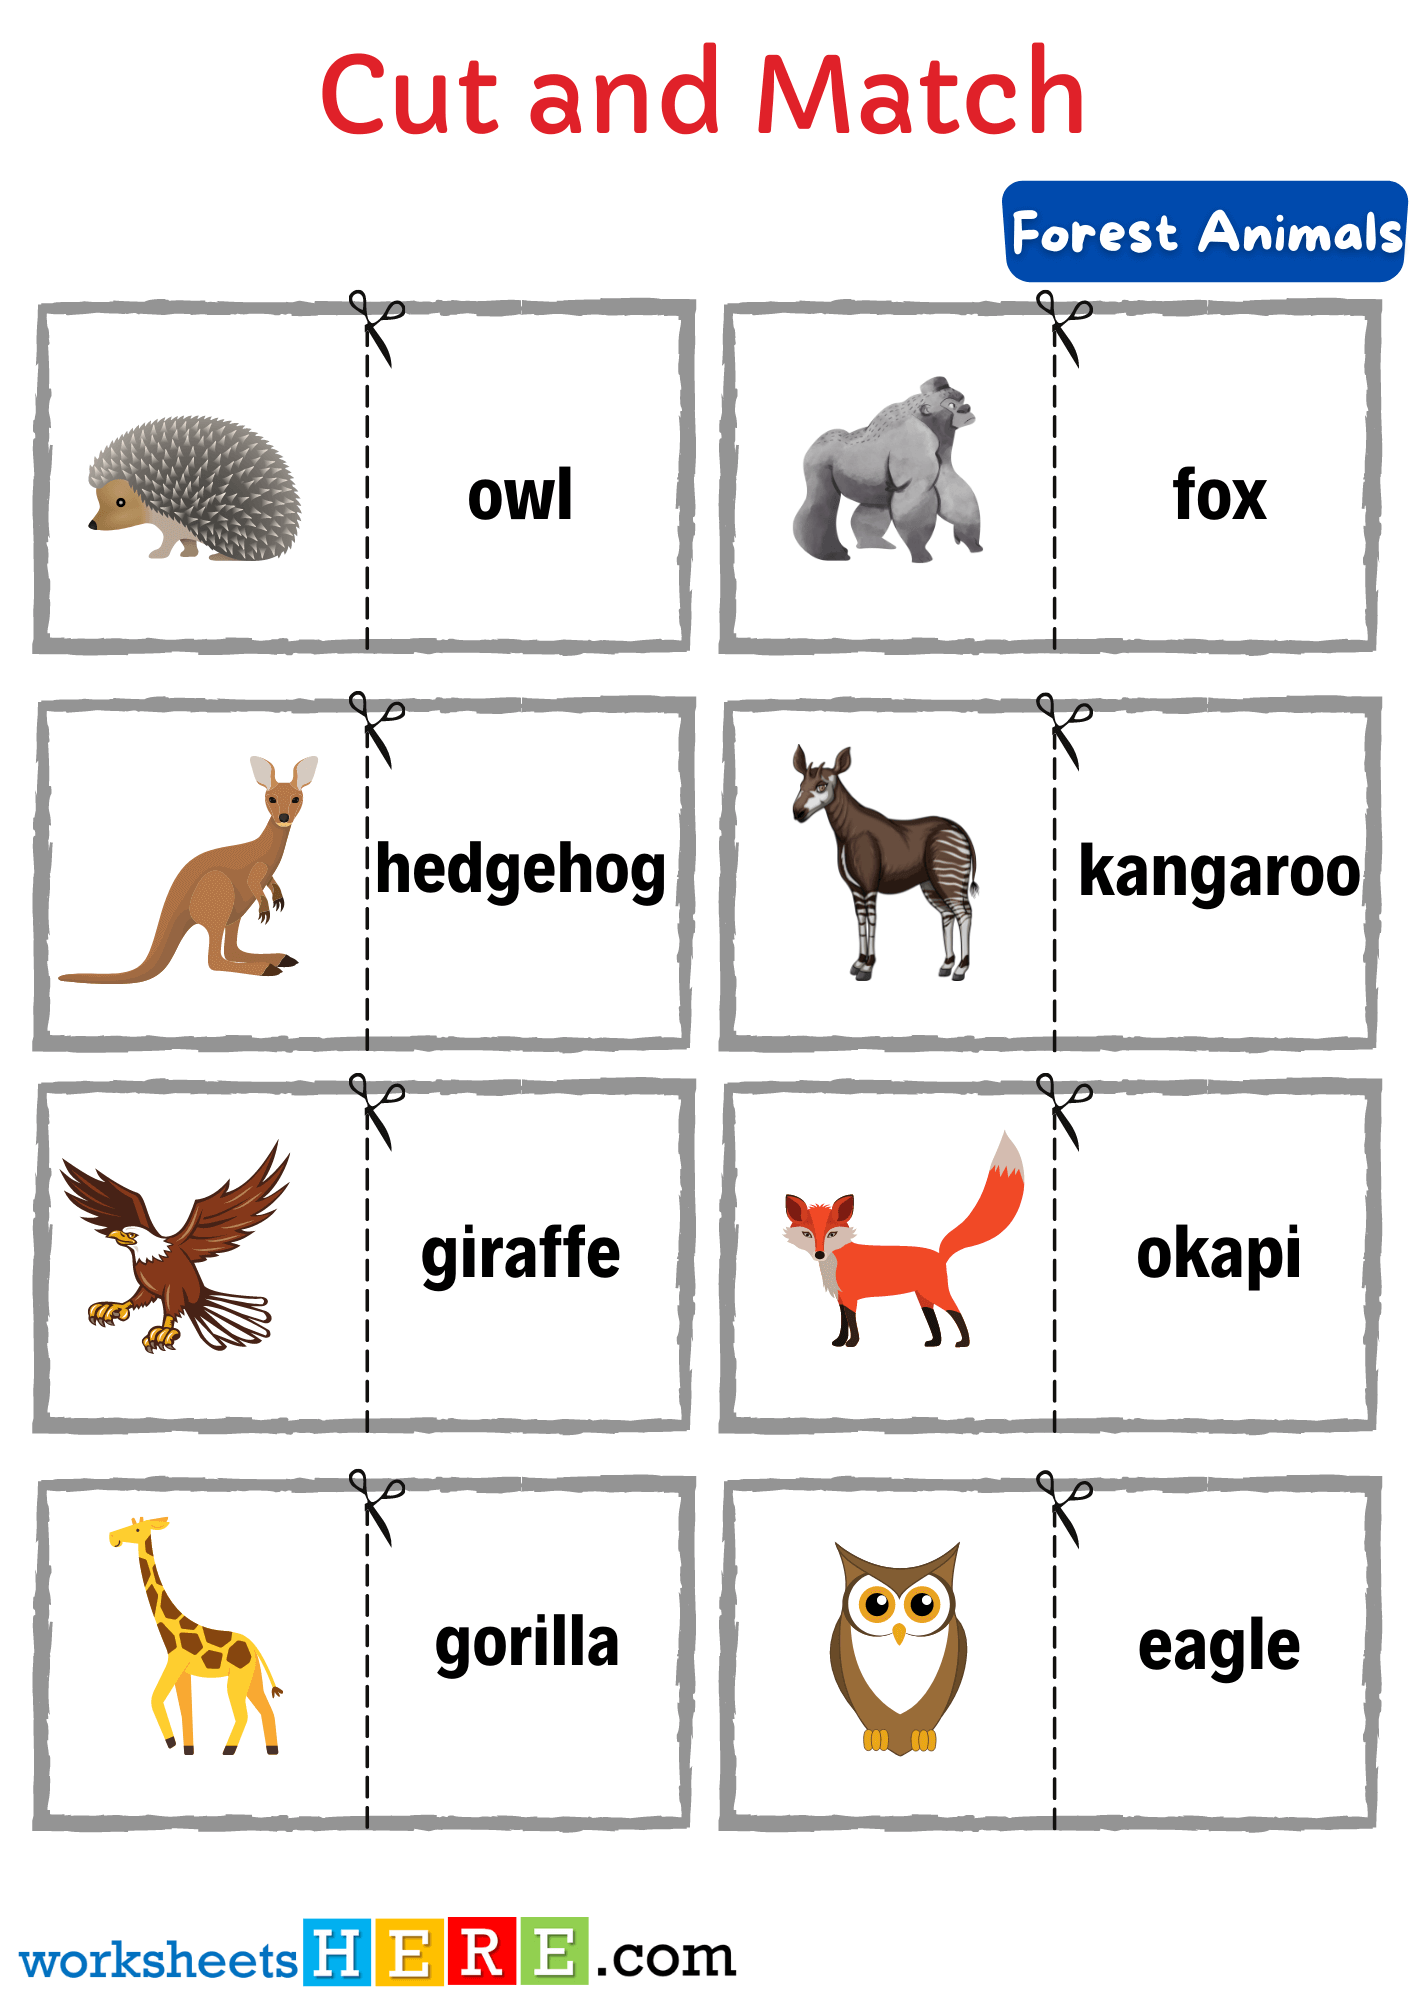 Cut and Match Forest Animals Words with Pictures Activity Worksheets For Kindergarten